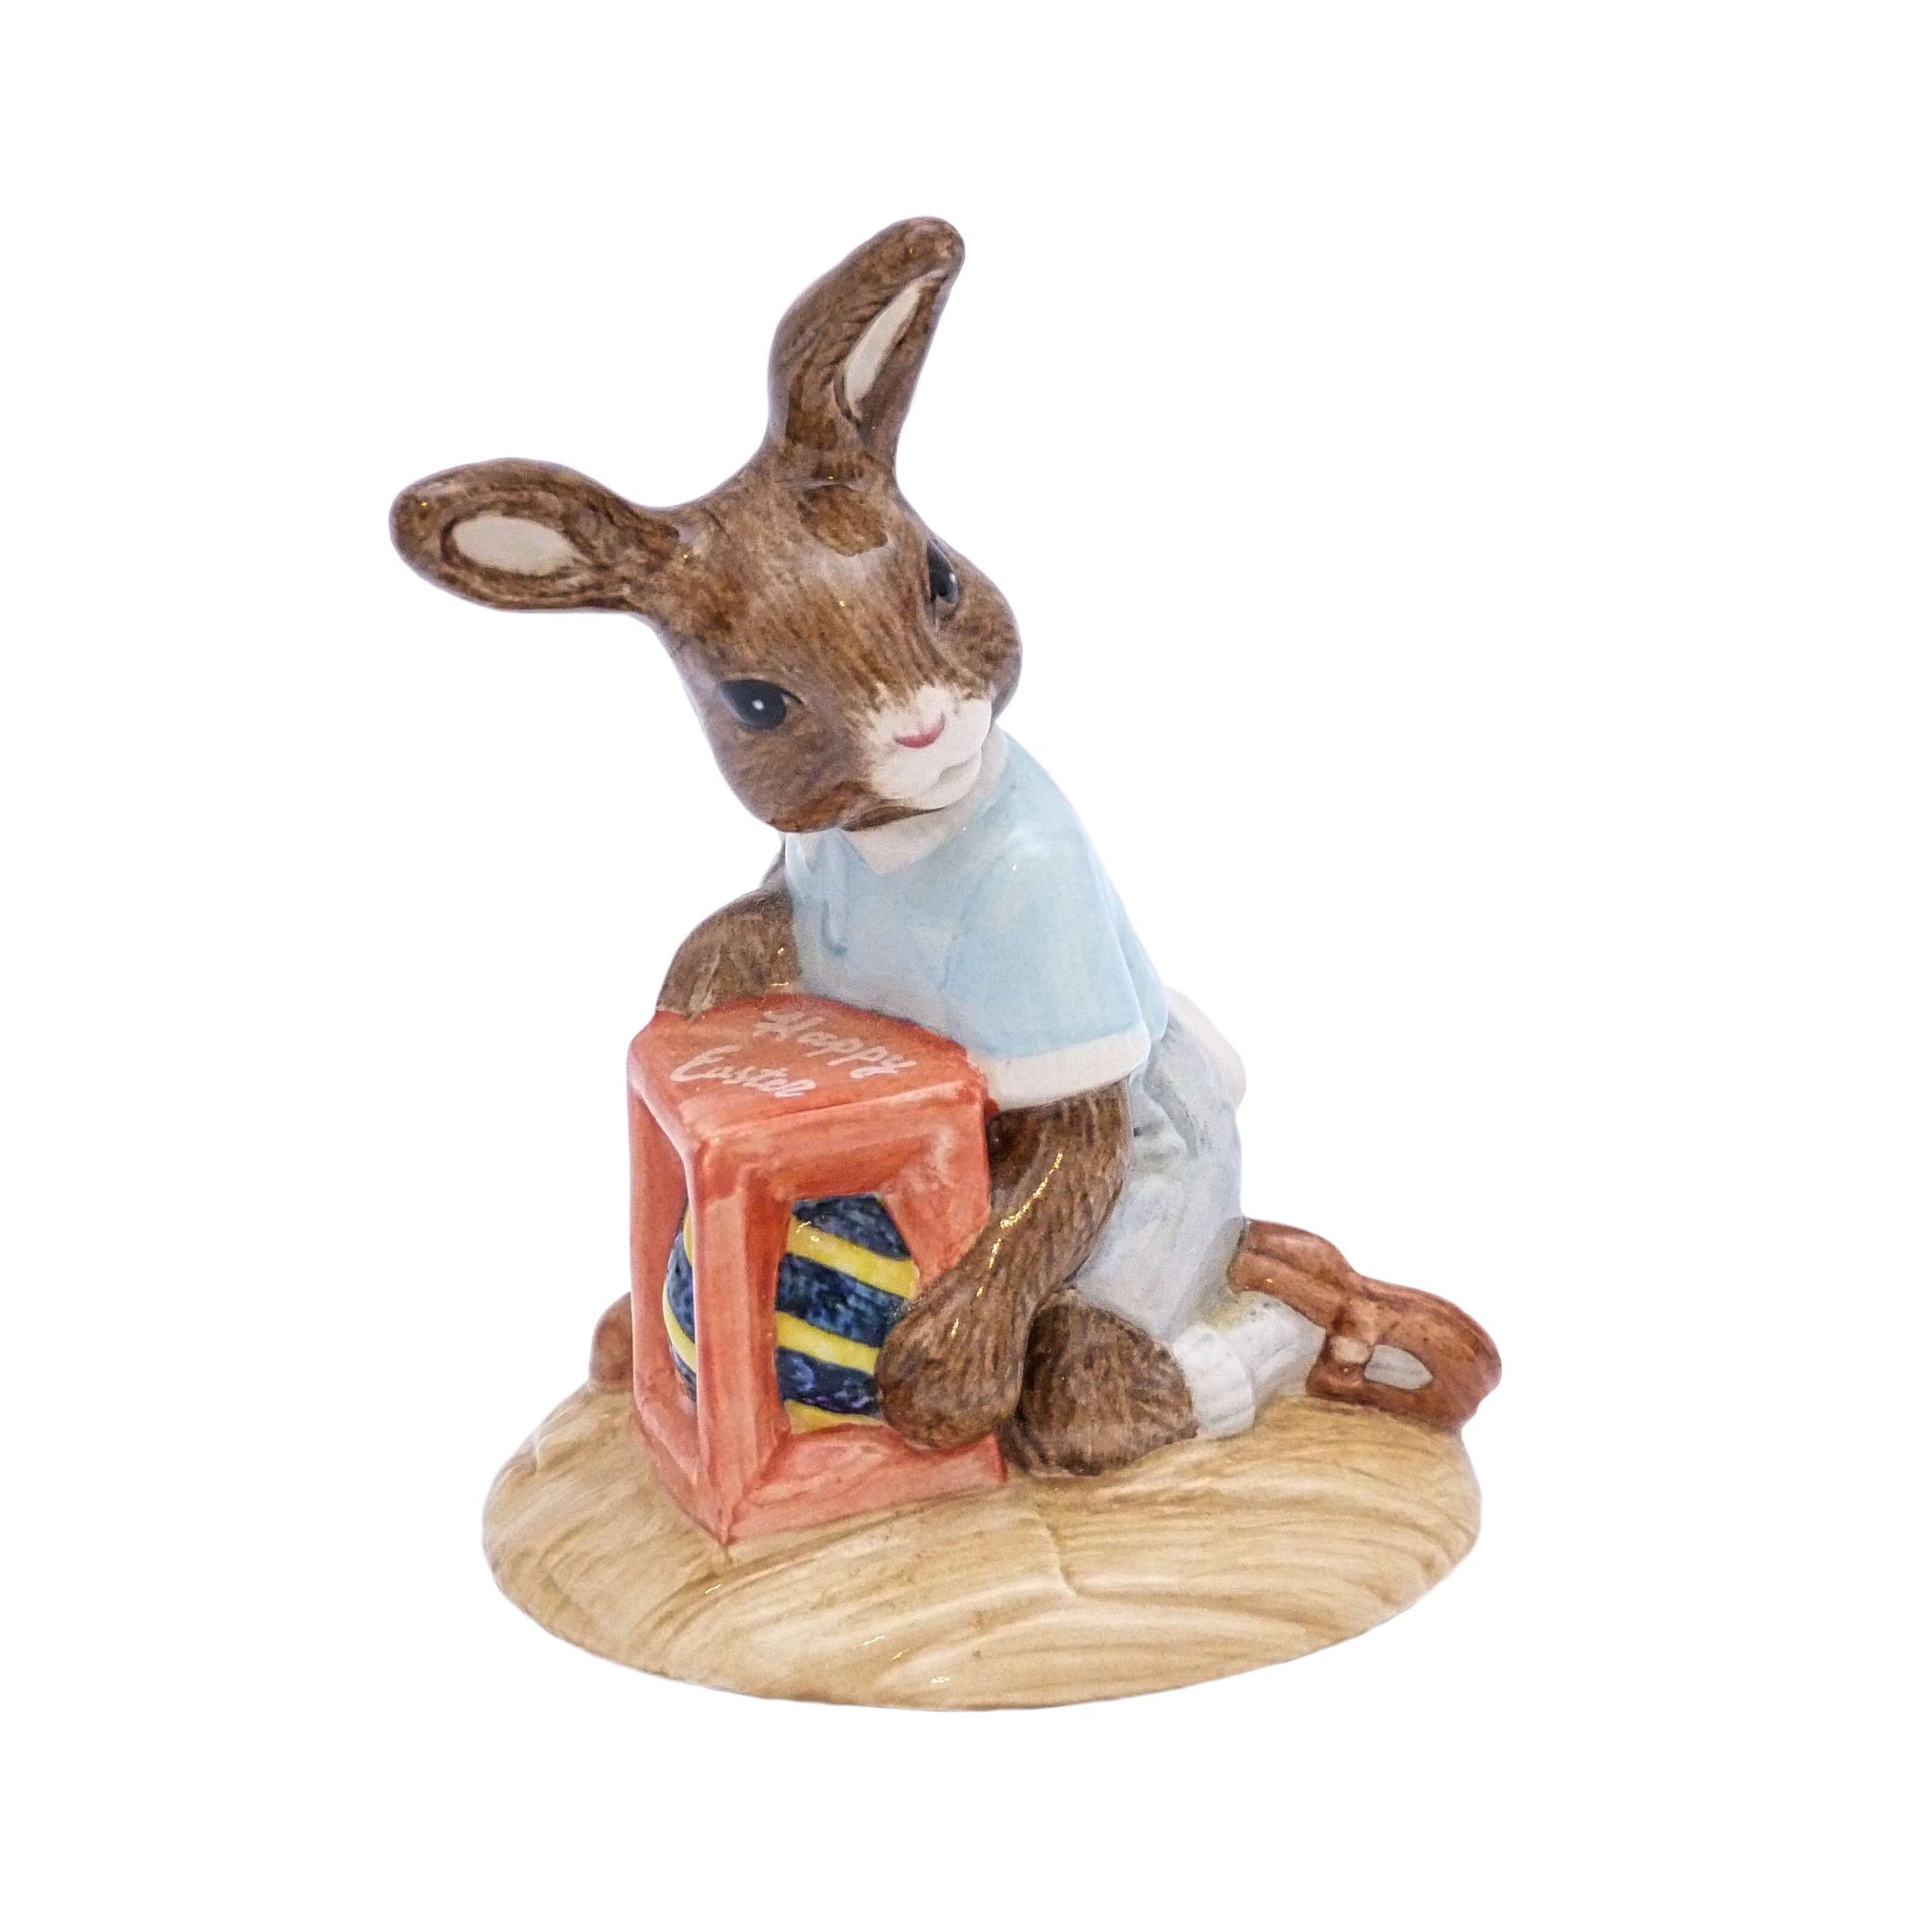 The bunny is kneeling holding his large Easter egg wrapped in blue and gold, the egg is in a red box with Happy Easter written on the top.